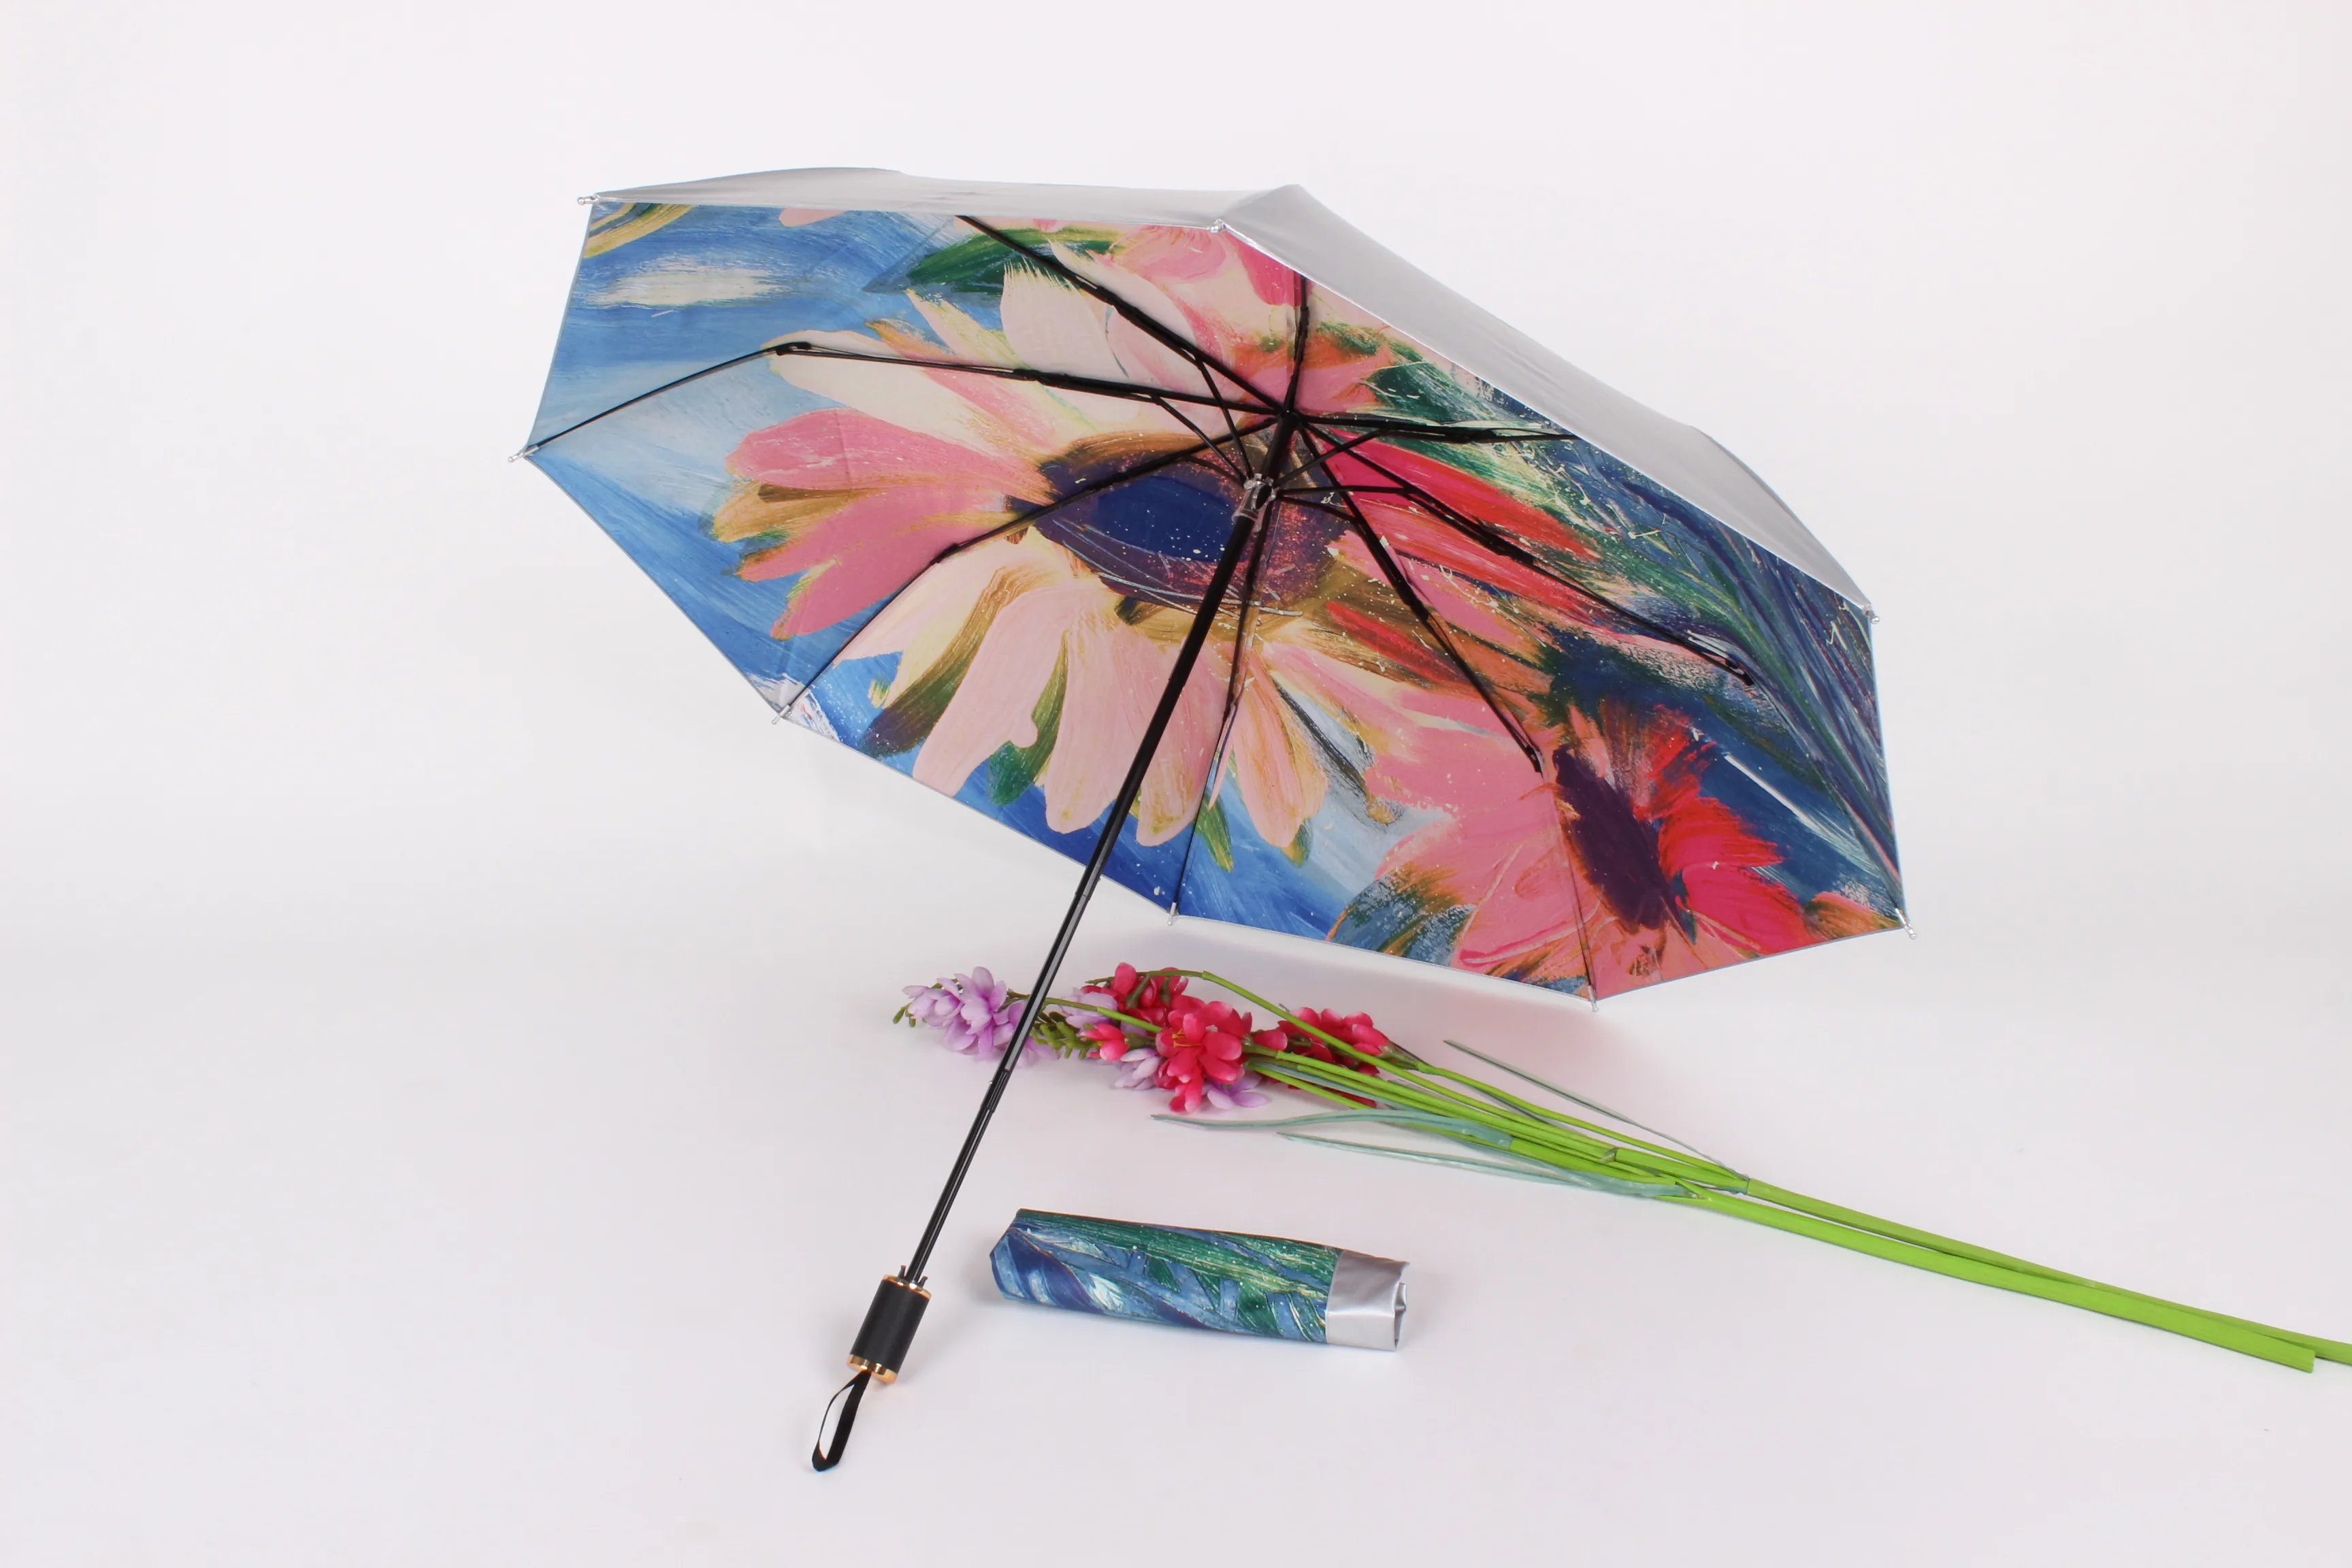 Parasol Super Quality For Lady 50+ Umbrella With Flower Heronsbill And Rose - Buy Parasol Umbrella,Super Quality Umbrella For Lady,Upf 50+ Umbrella With Flower Product on Alibaba.com